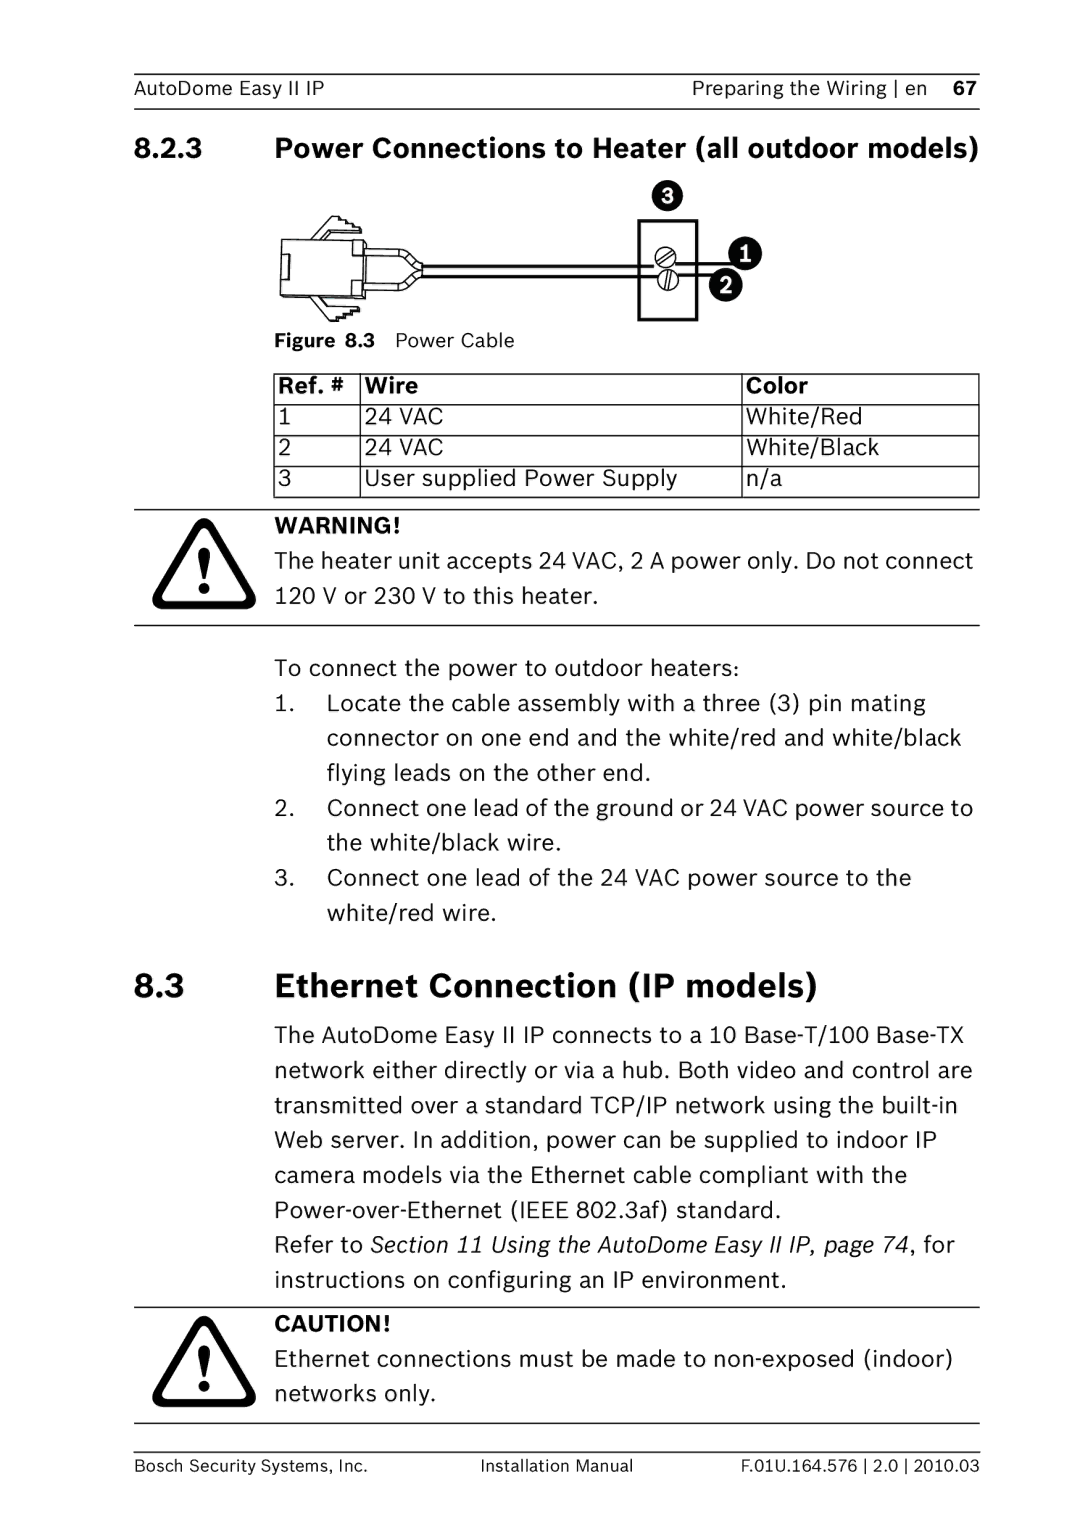 Bosch Appliances VEZ installation manual Ethernet Connection IP models, Power Connections to Heater all outdoor models 